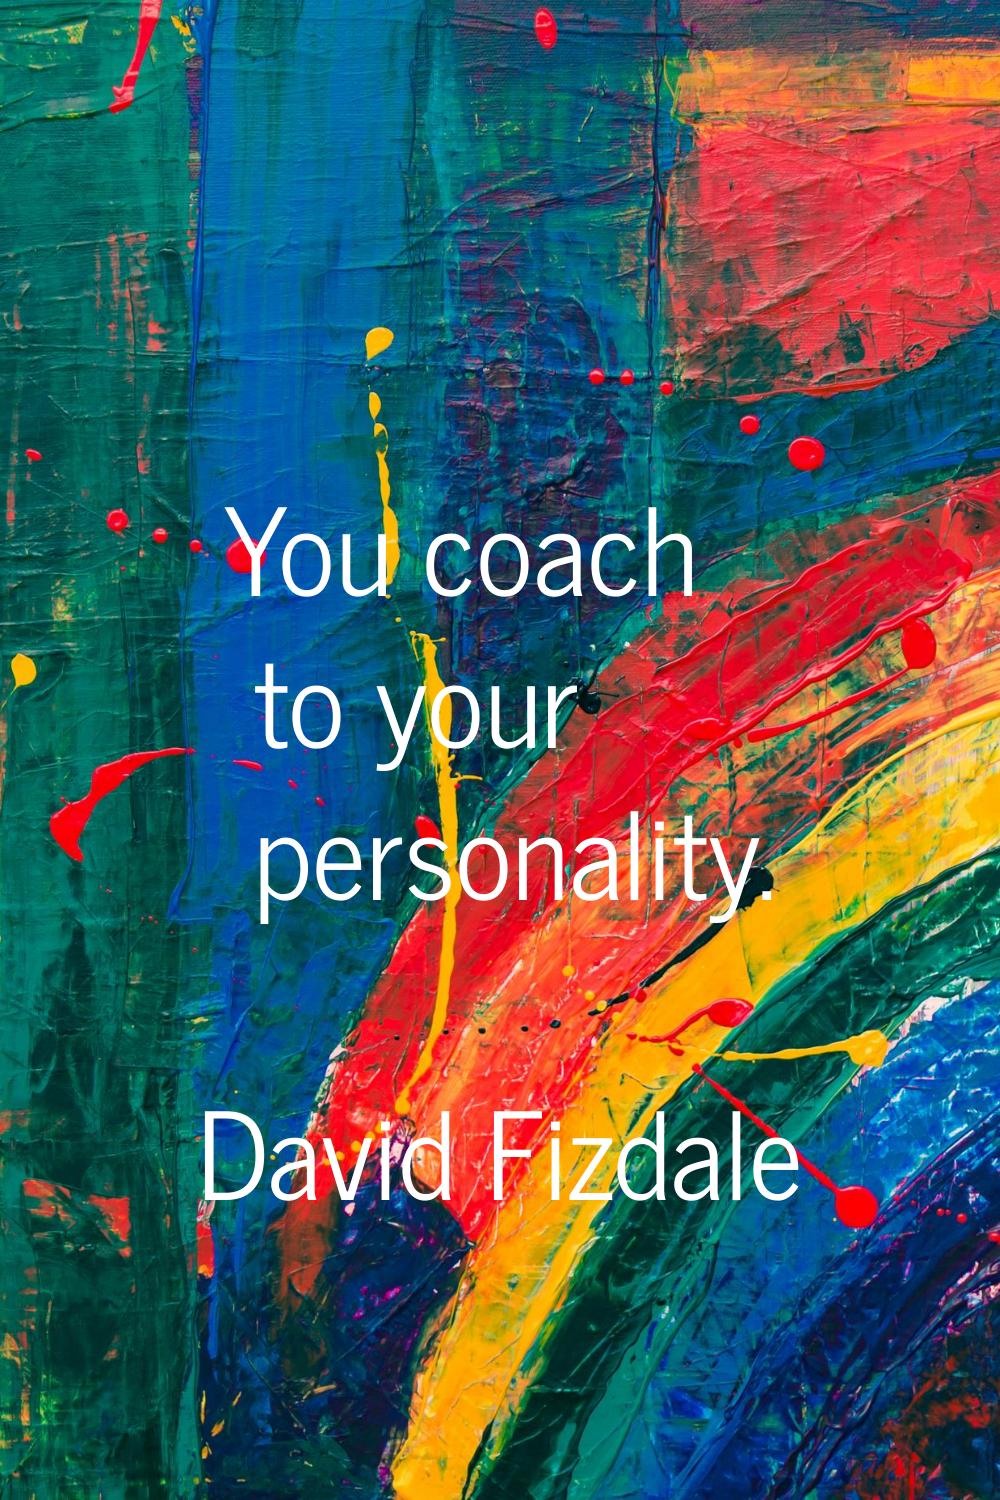 You coach to your personality.